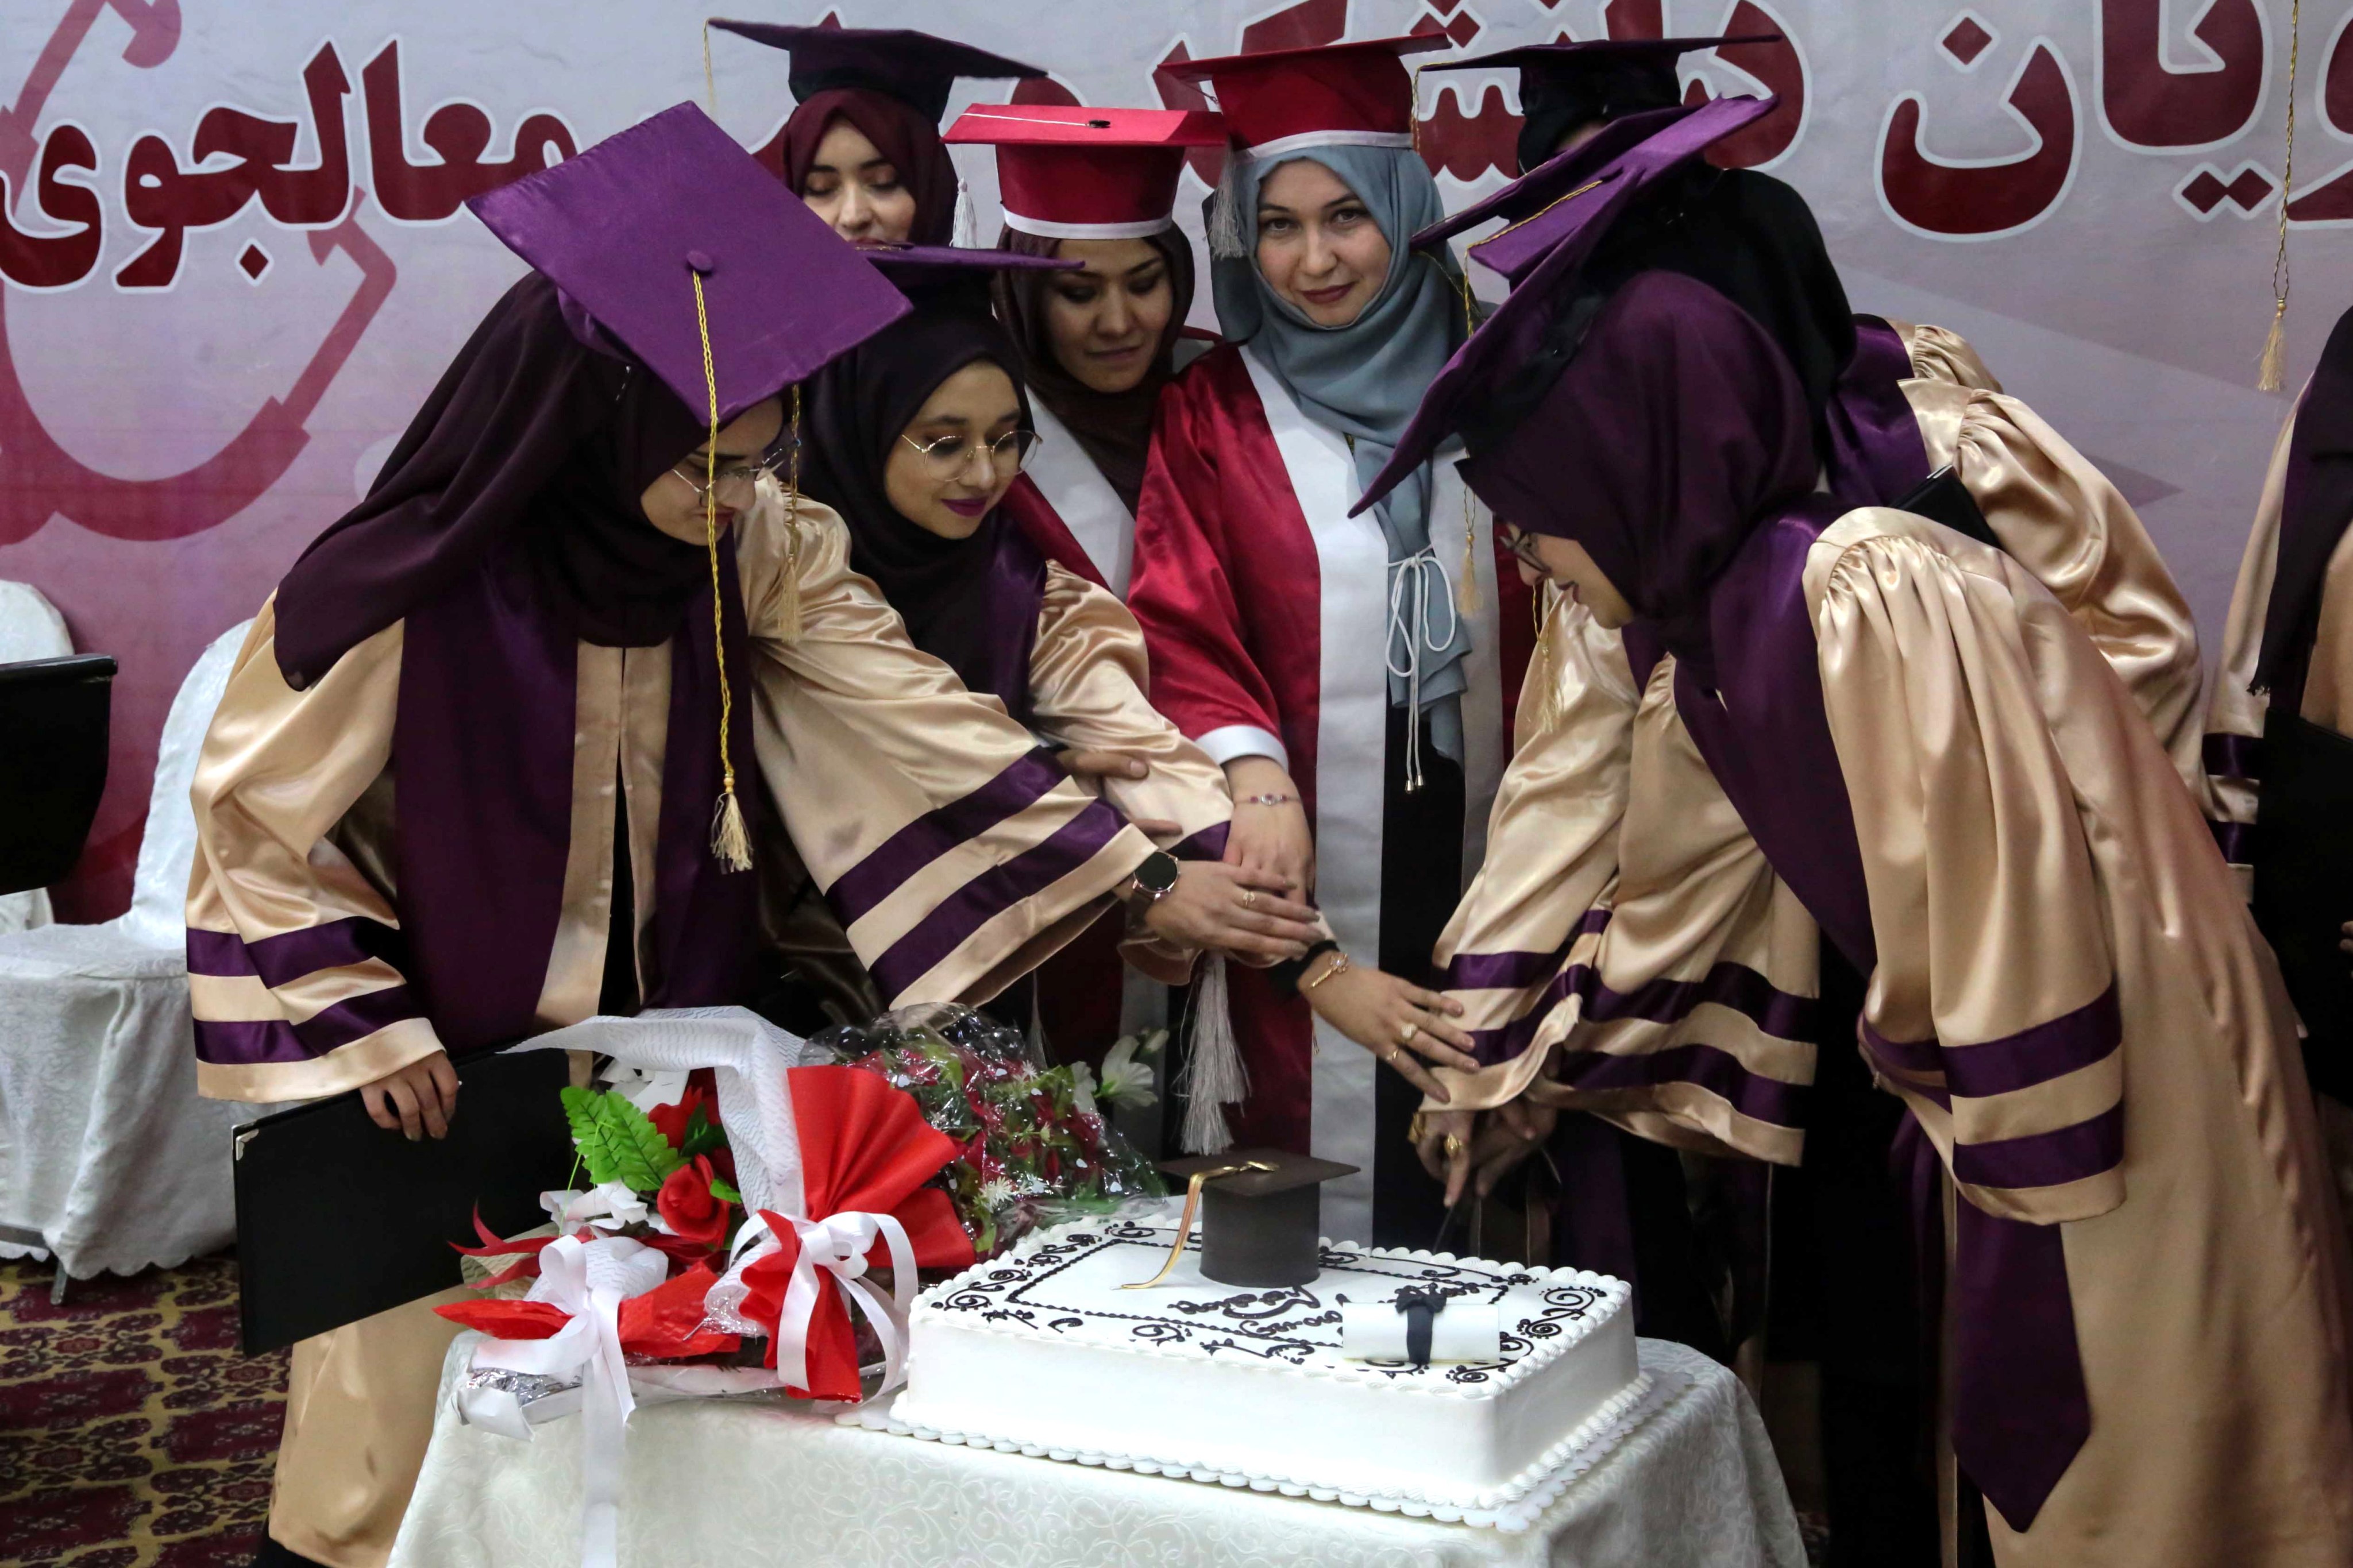 Afghan girls from a private university celebrate their graduation in Kabul, Afghanistan on January 4. On Saturday, the Taliban reinforced in a message to private universities that Afghan women are barred from taking university entrance exams. Photo: EPA-EFE